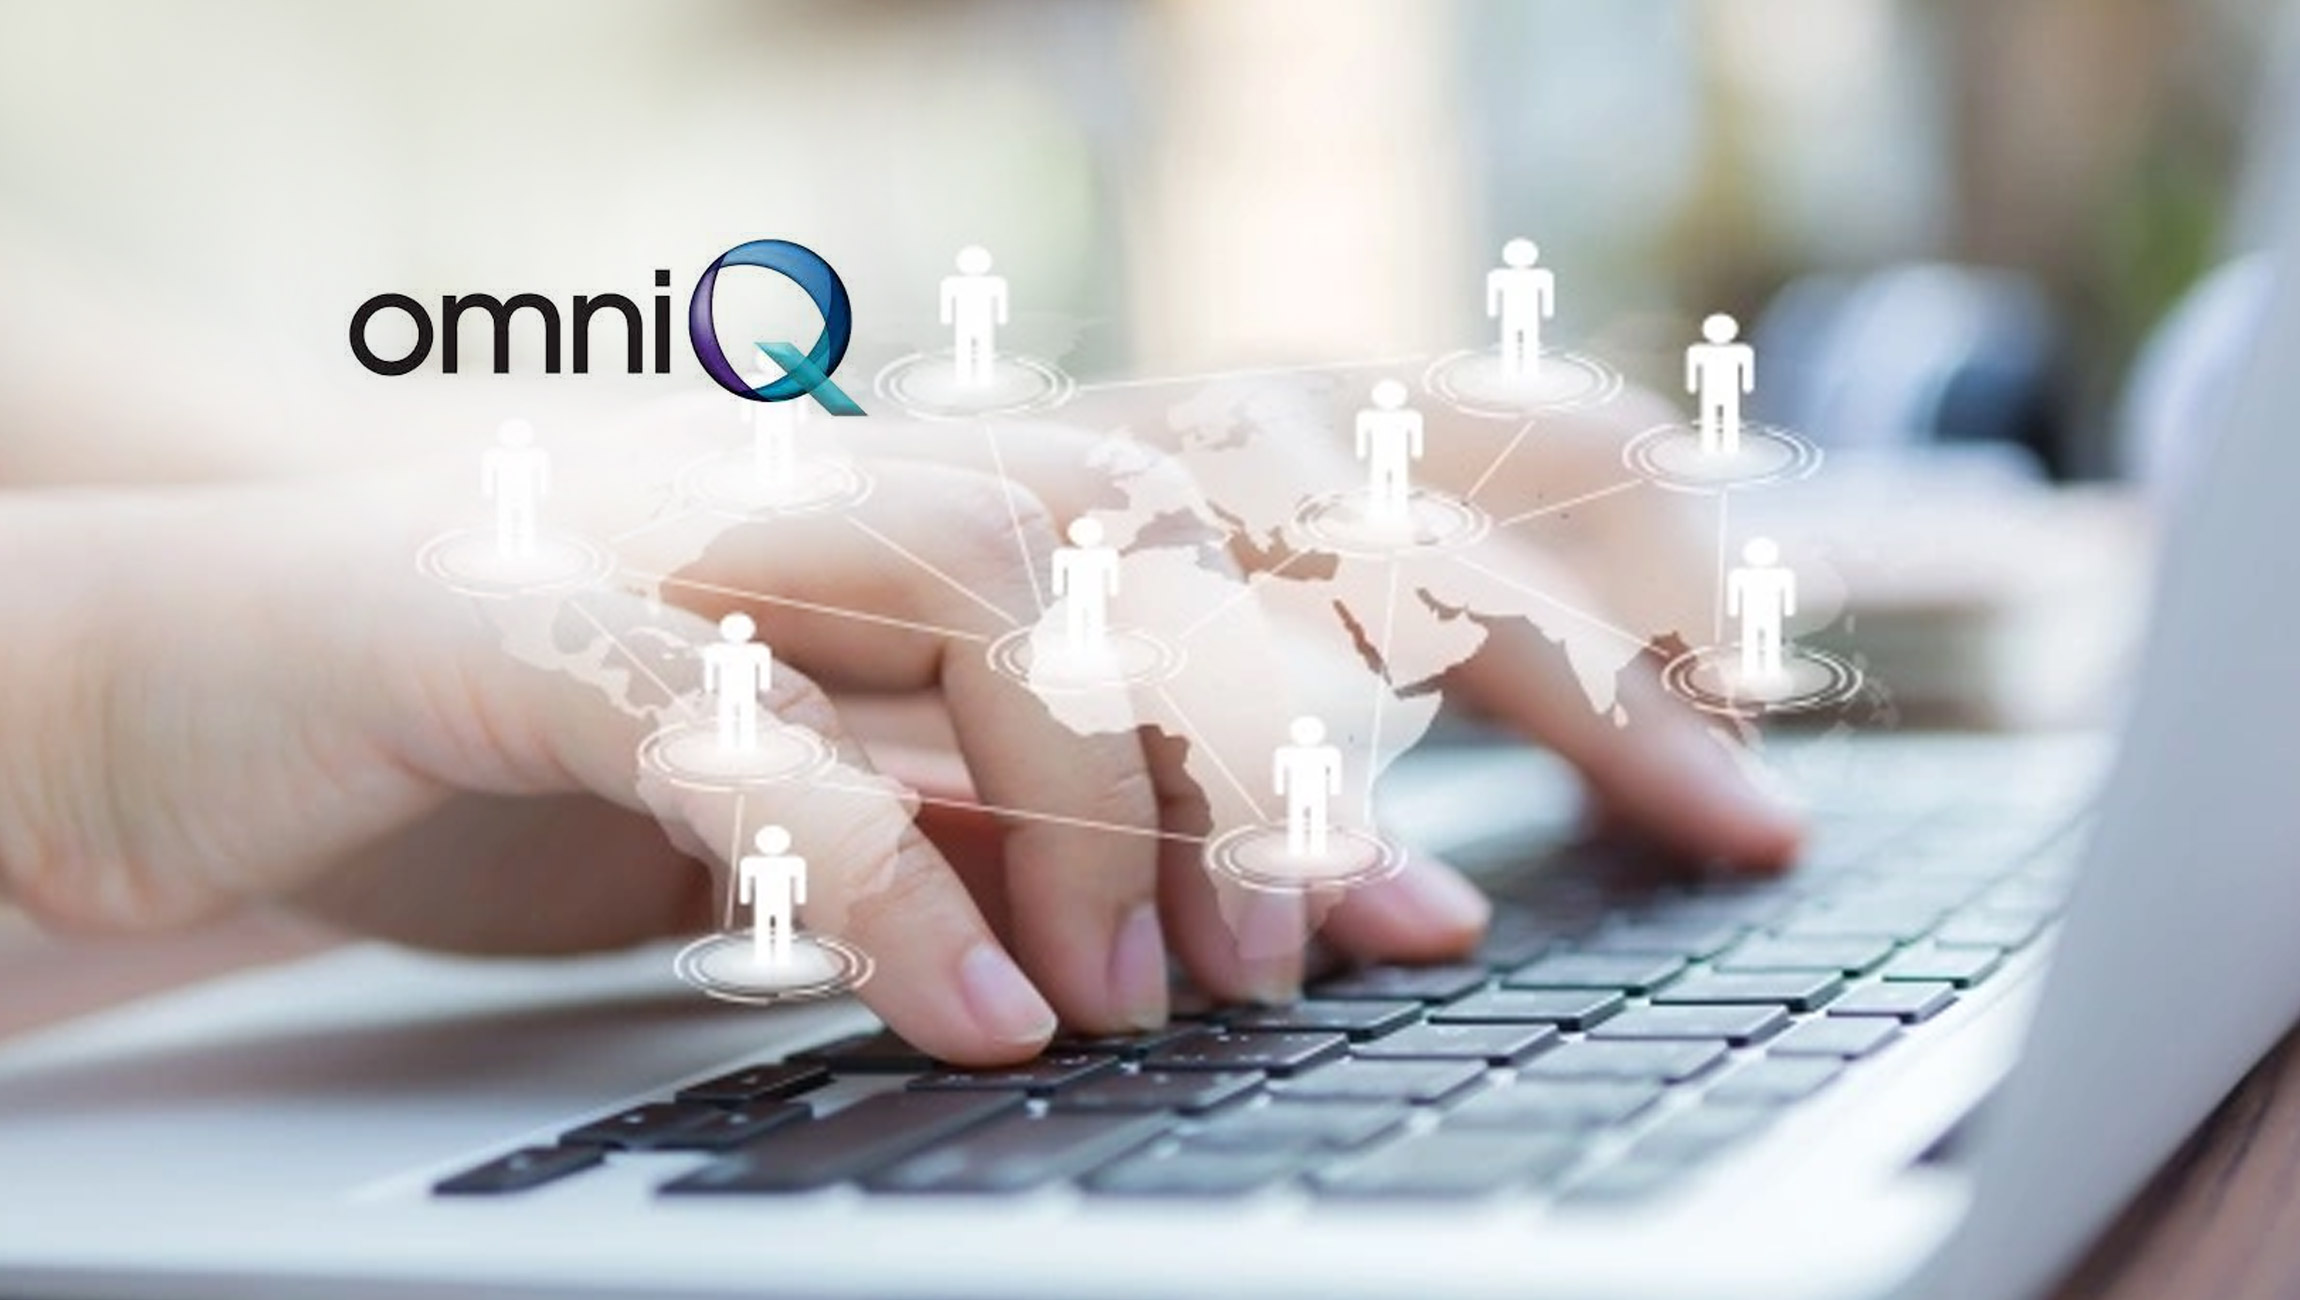 OMNIQ-Receives-_1.8-Million-Purchase-Order-for-IoT-Contactless--Data-Collection-Solution-from-a-Fortune-500-Leading-IT-Supply-Chain-Provider